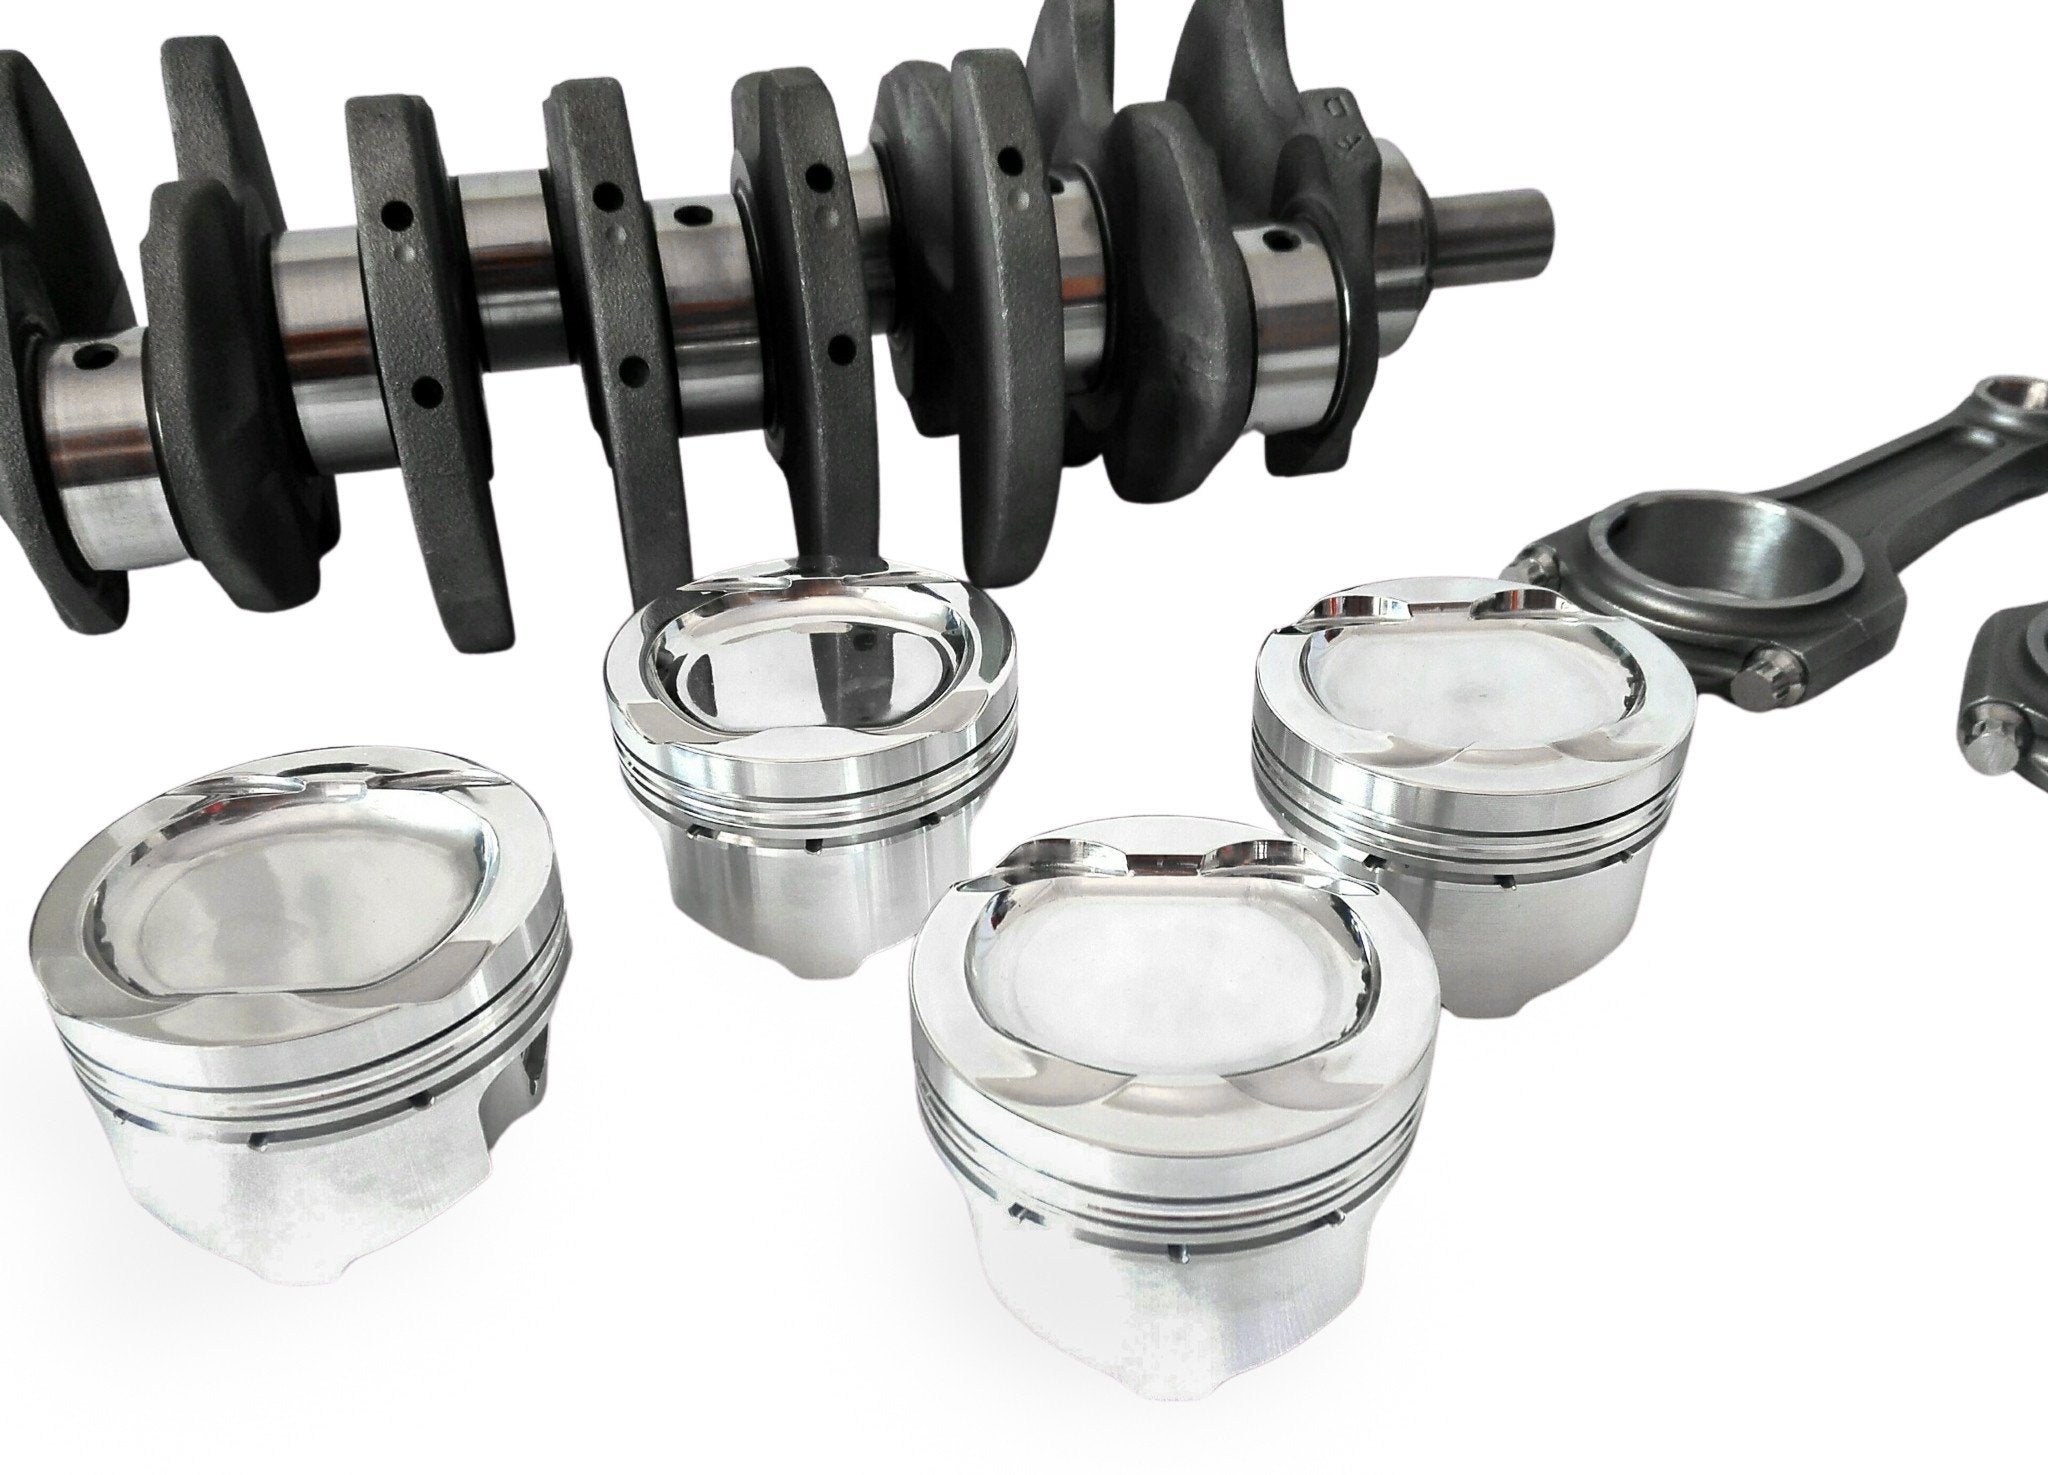 1.4 TSI Stroker Kit with Reconditioned Crankshaft - 1.400 to 1.600cc - BMY / CAX / CAV / CTH - RTMG Performance